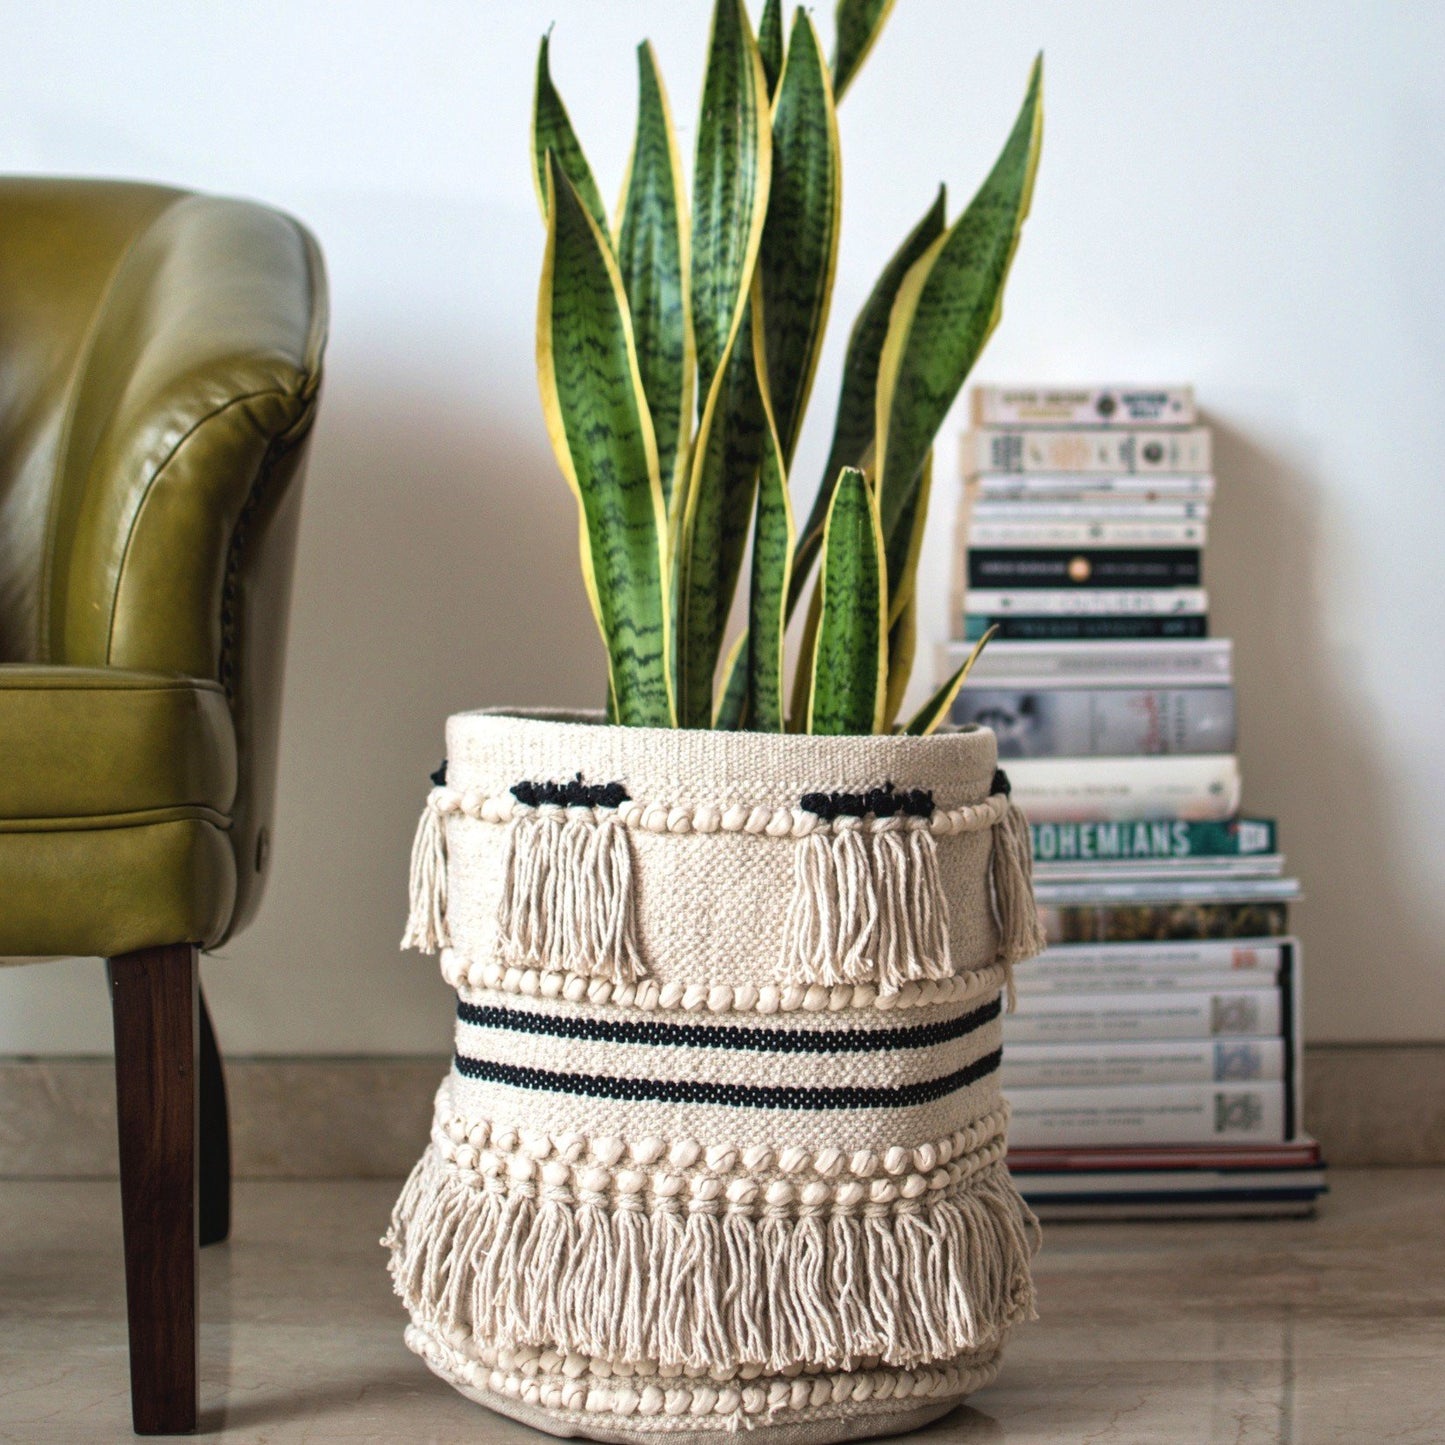 Jasmine handwoven basket with tassels for bohemian home